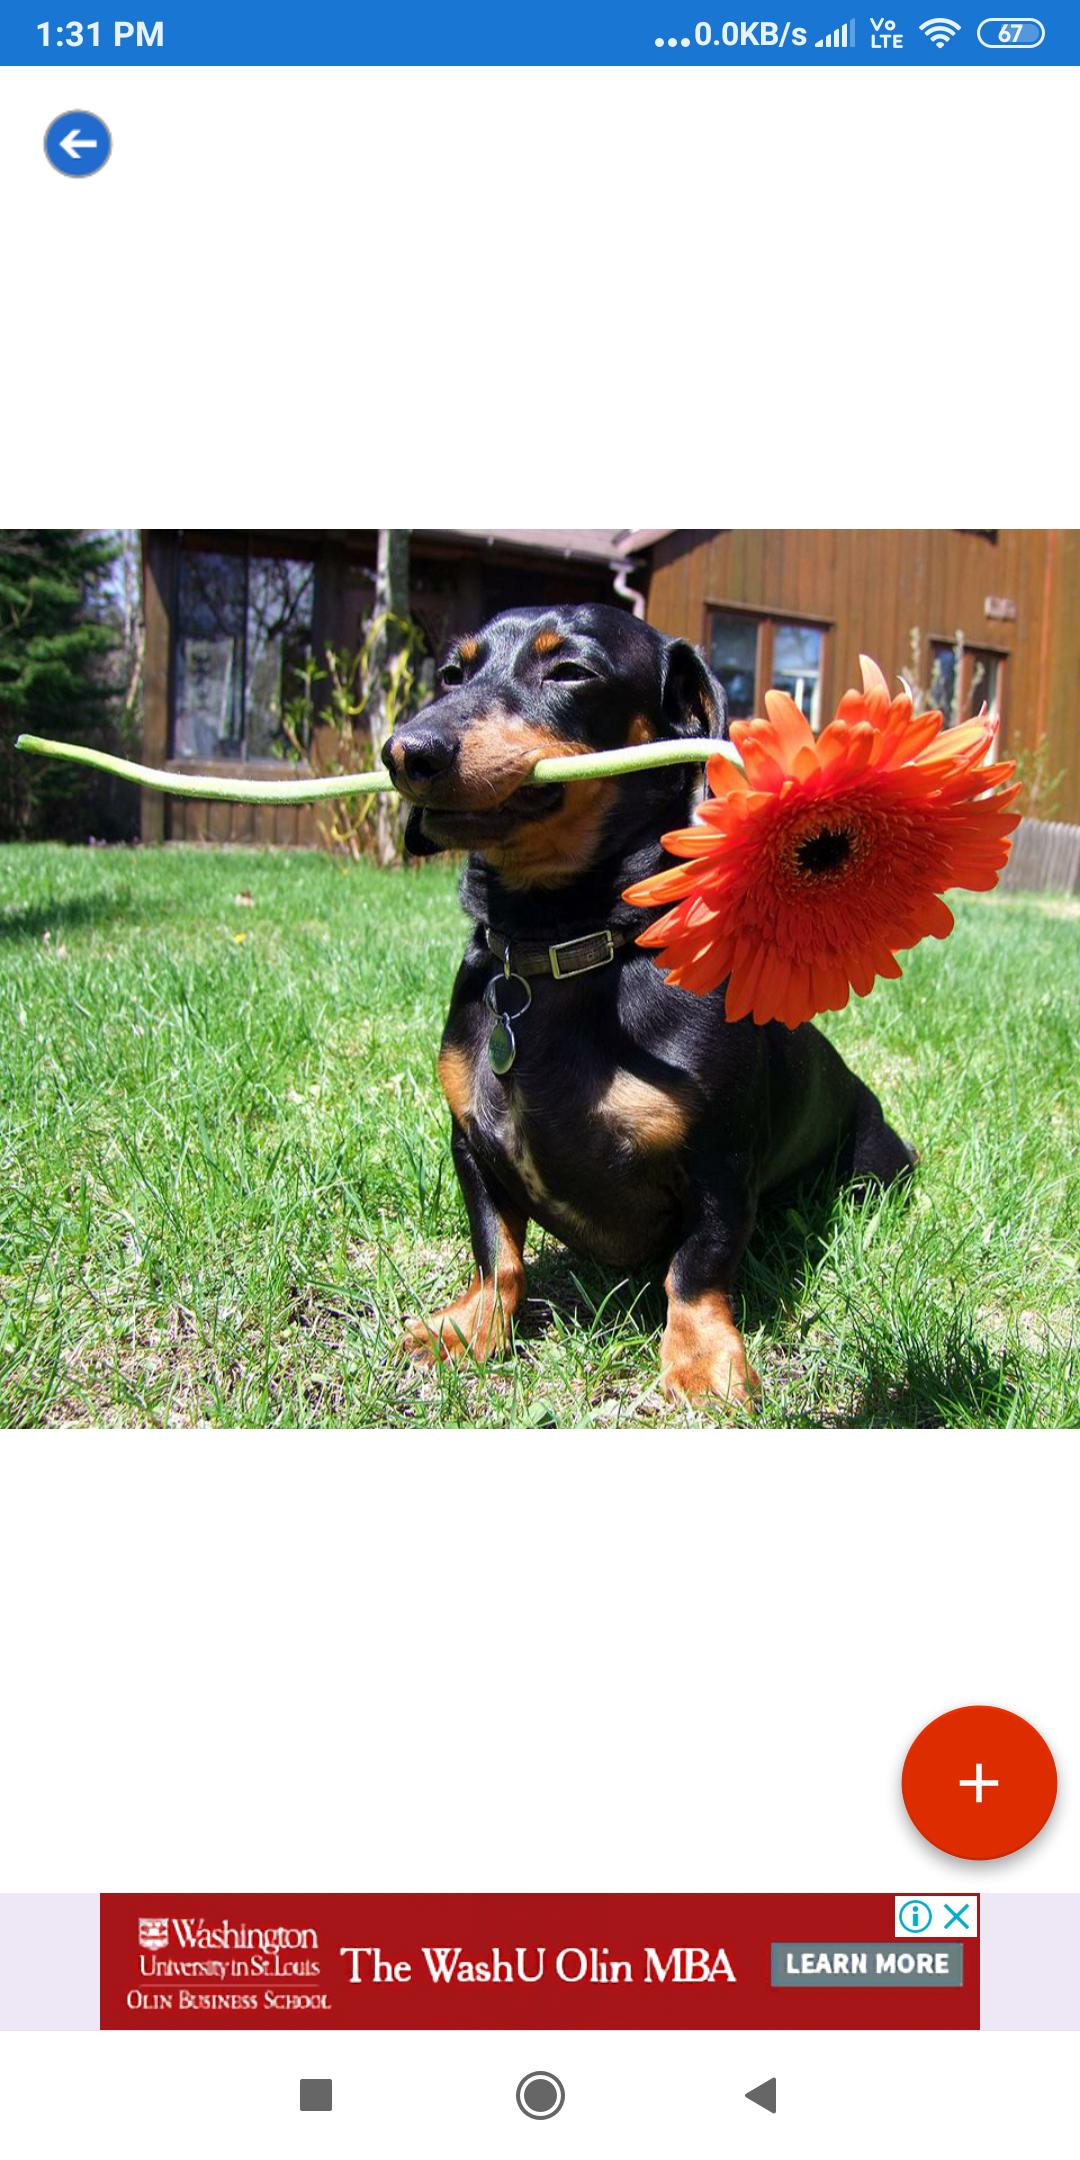 Dachshund Wallpapers: HD Images,Free Pics download 2.0.37 Screenshot 6